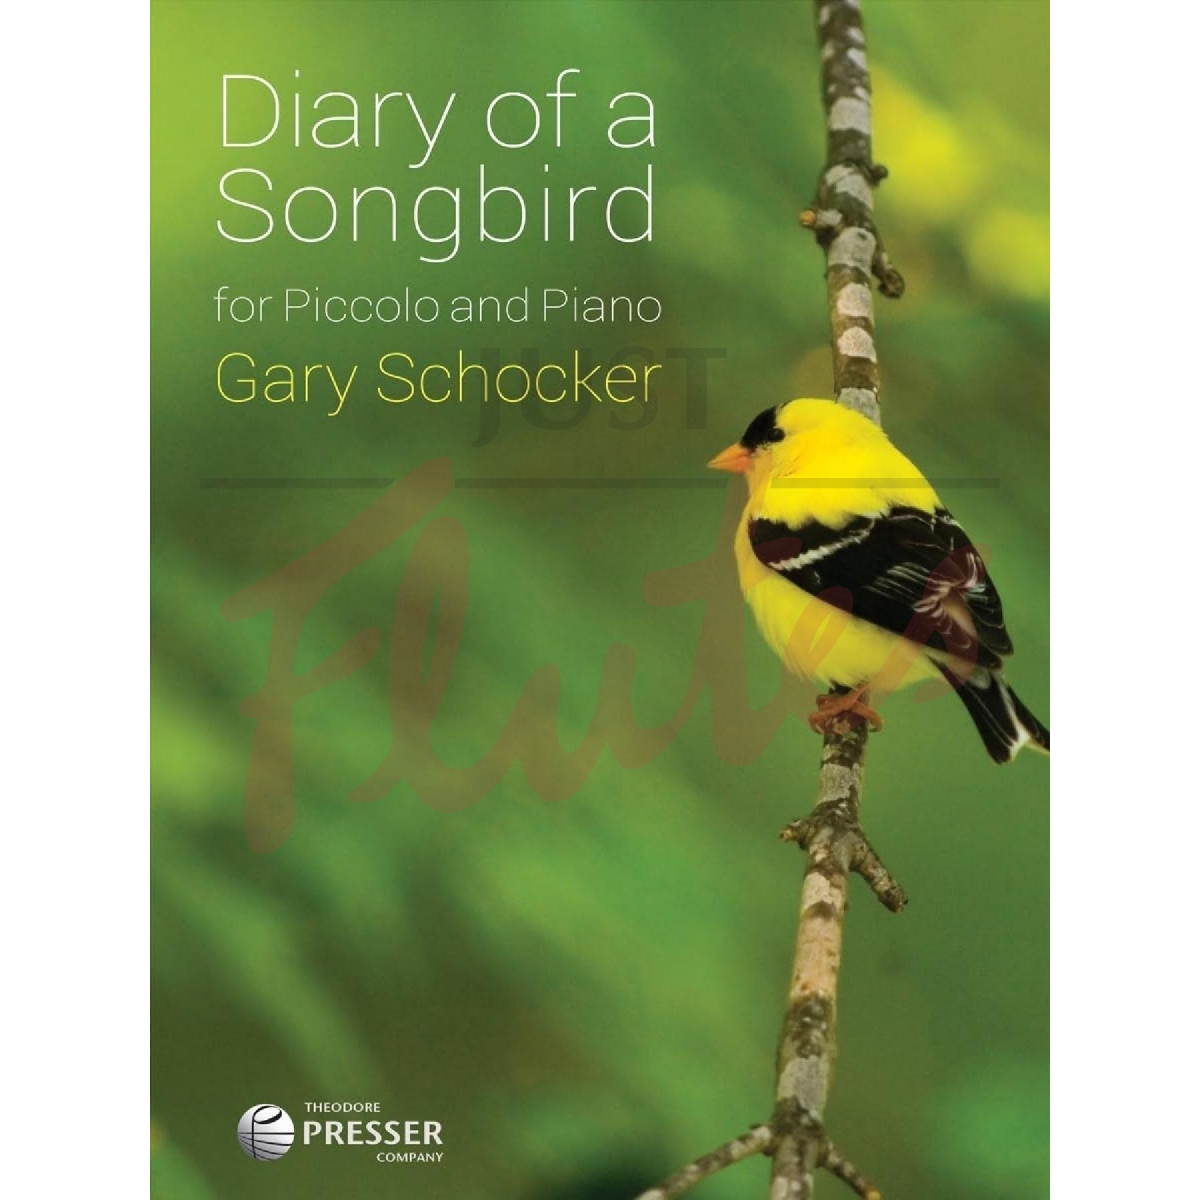 Diary of a Songbird for Piccolo and Piano